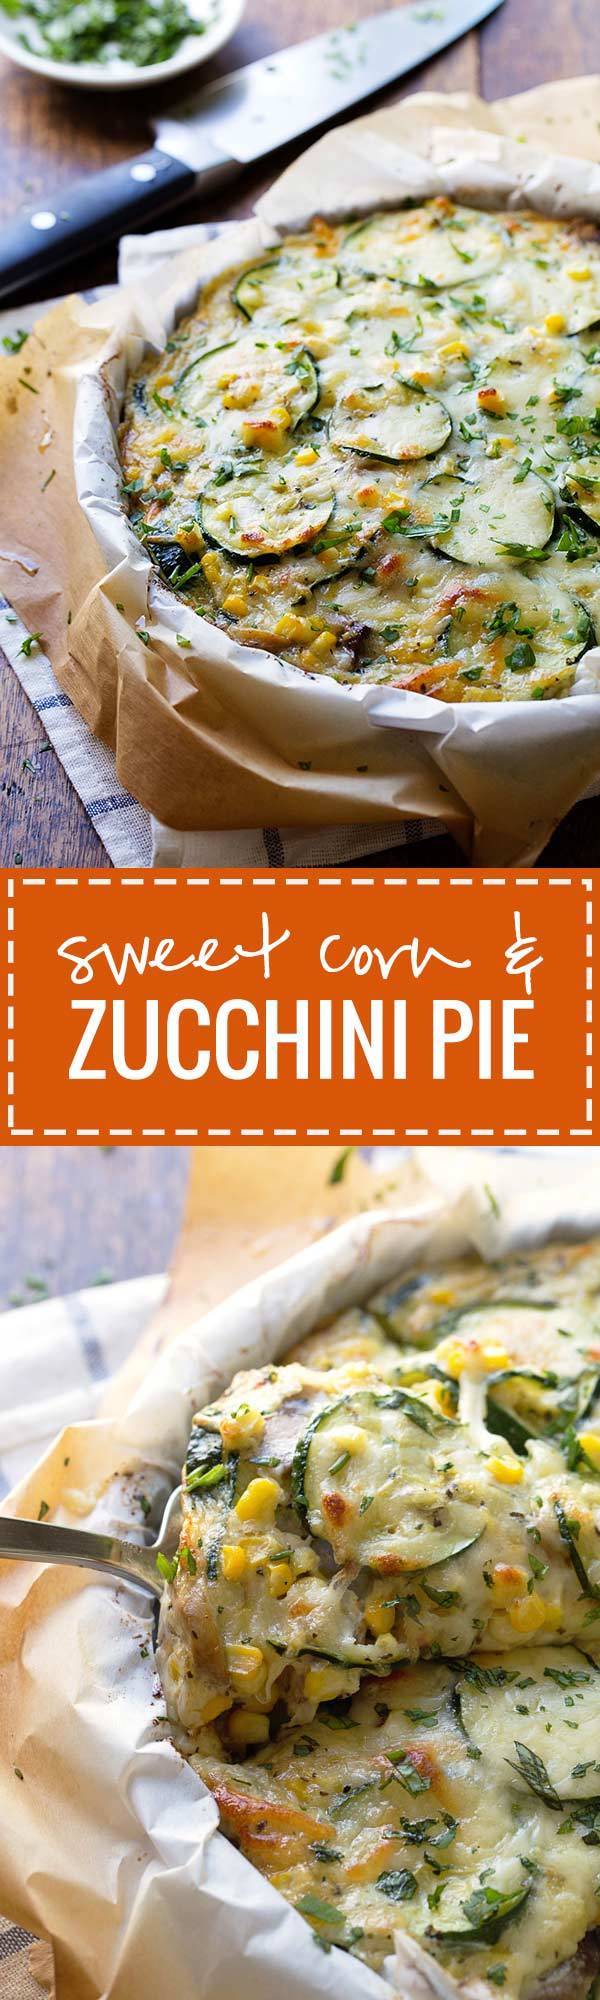 This crustless Sweet Corn and Zucchini Pie is so incredibly simple to make and it's the perfect way to enjoy summer produce! 275 calories.